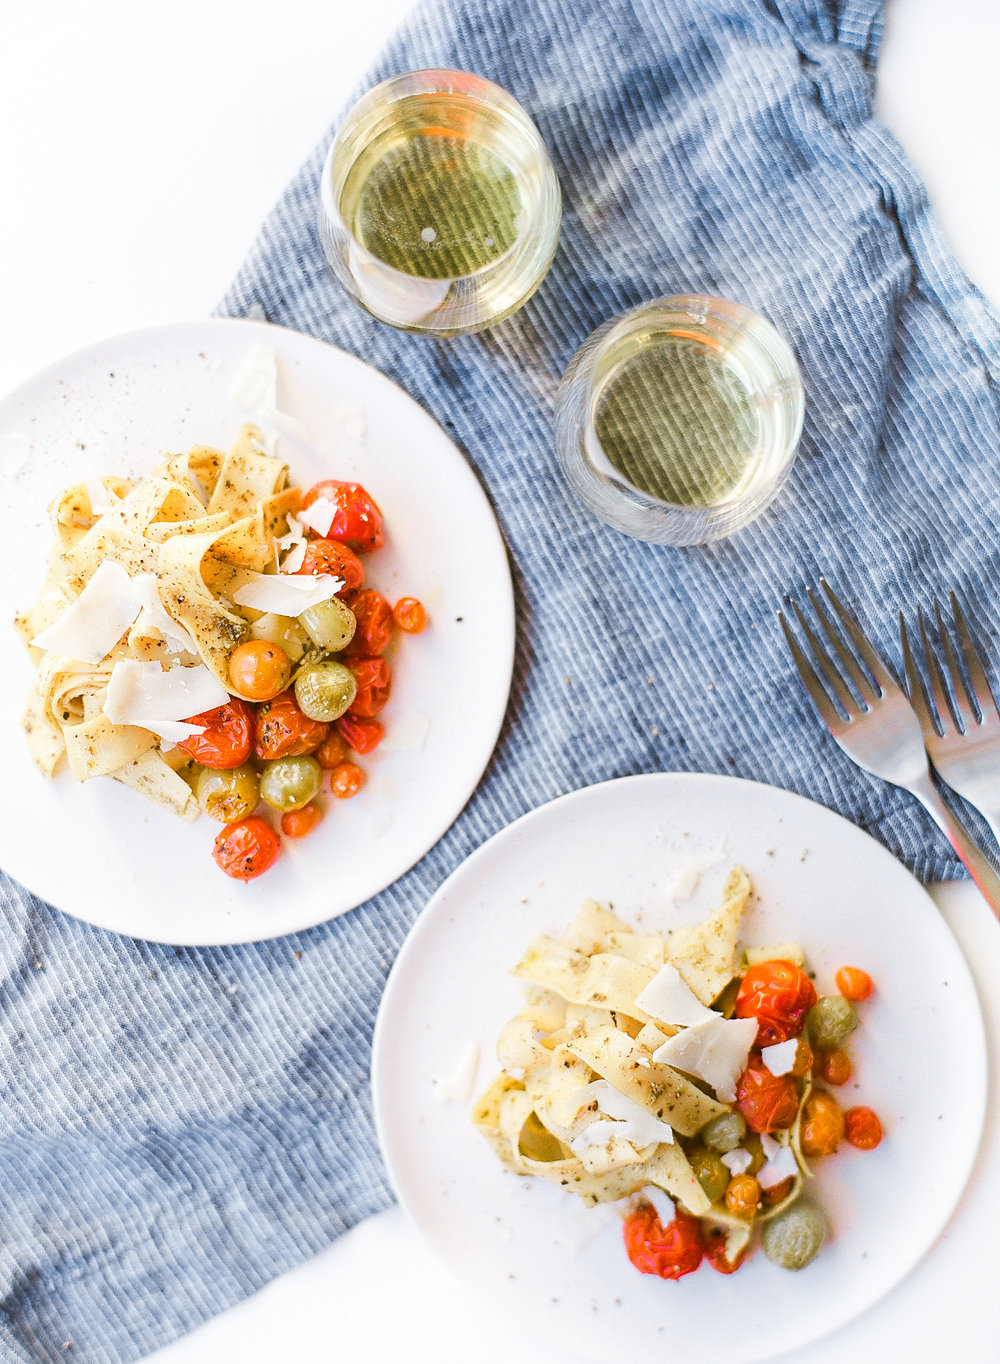 Now it's time to eat! You know the drill, pour yourself a glass of wine (we love the Kendall-Jackson Vintner's Reserve Chardonnay) and step to it. This Lemon Verbena Basil Pesto pasta dish is absolutely divine and it's the perfect introduction to your new #DIY herb garden..